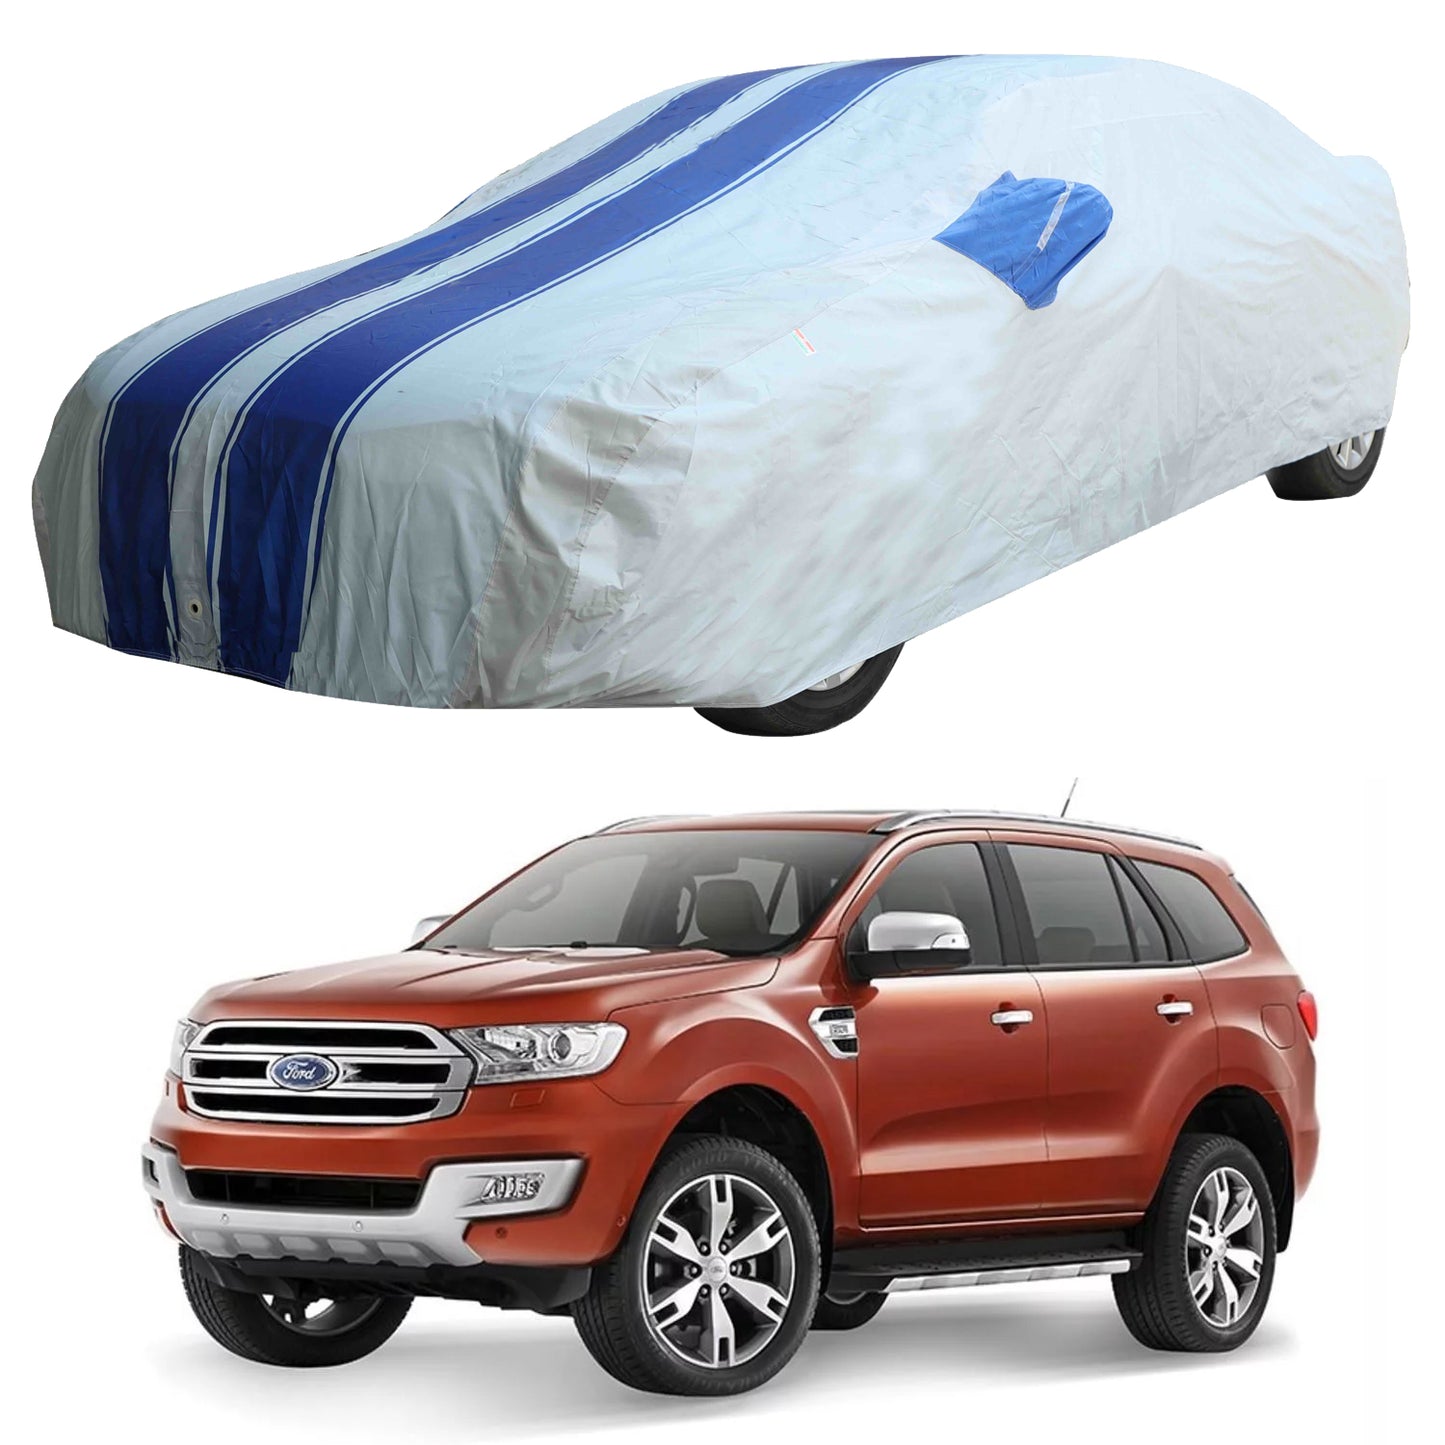 Oshotto X5 Grey/Blue 100% Anti Reflective, dustproof and Water Resistant Car Body Cover with Mirror Pocket For Ford New Endeavour